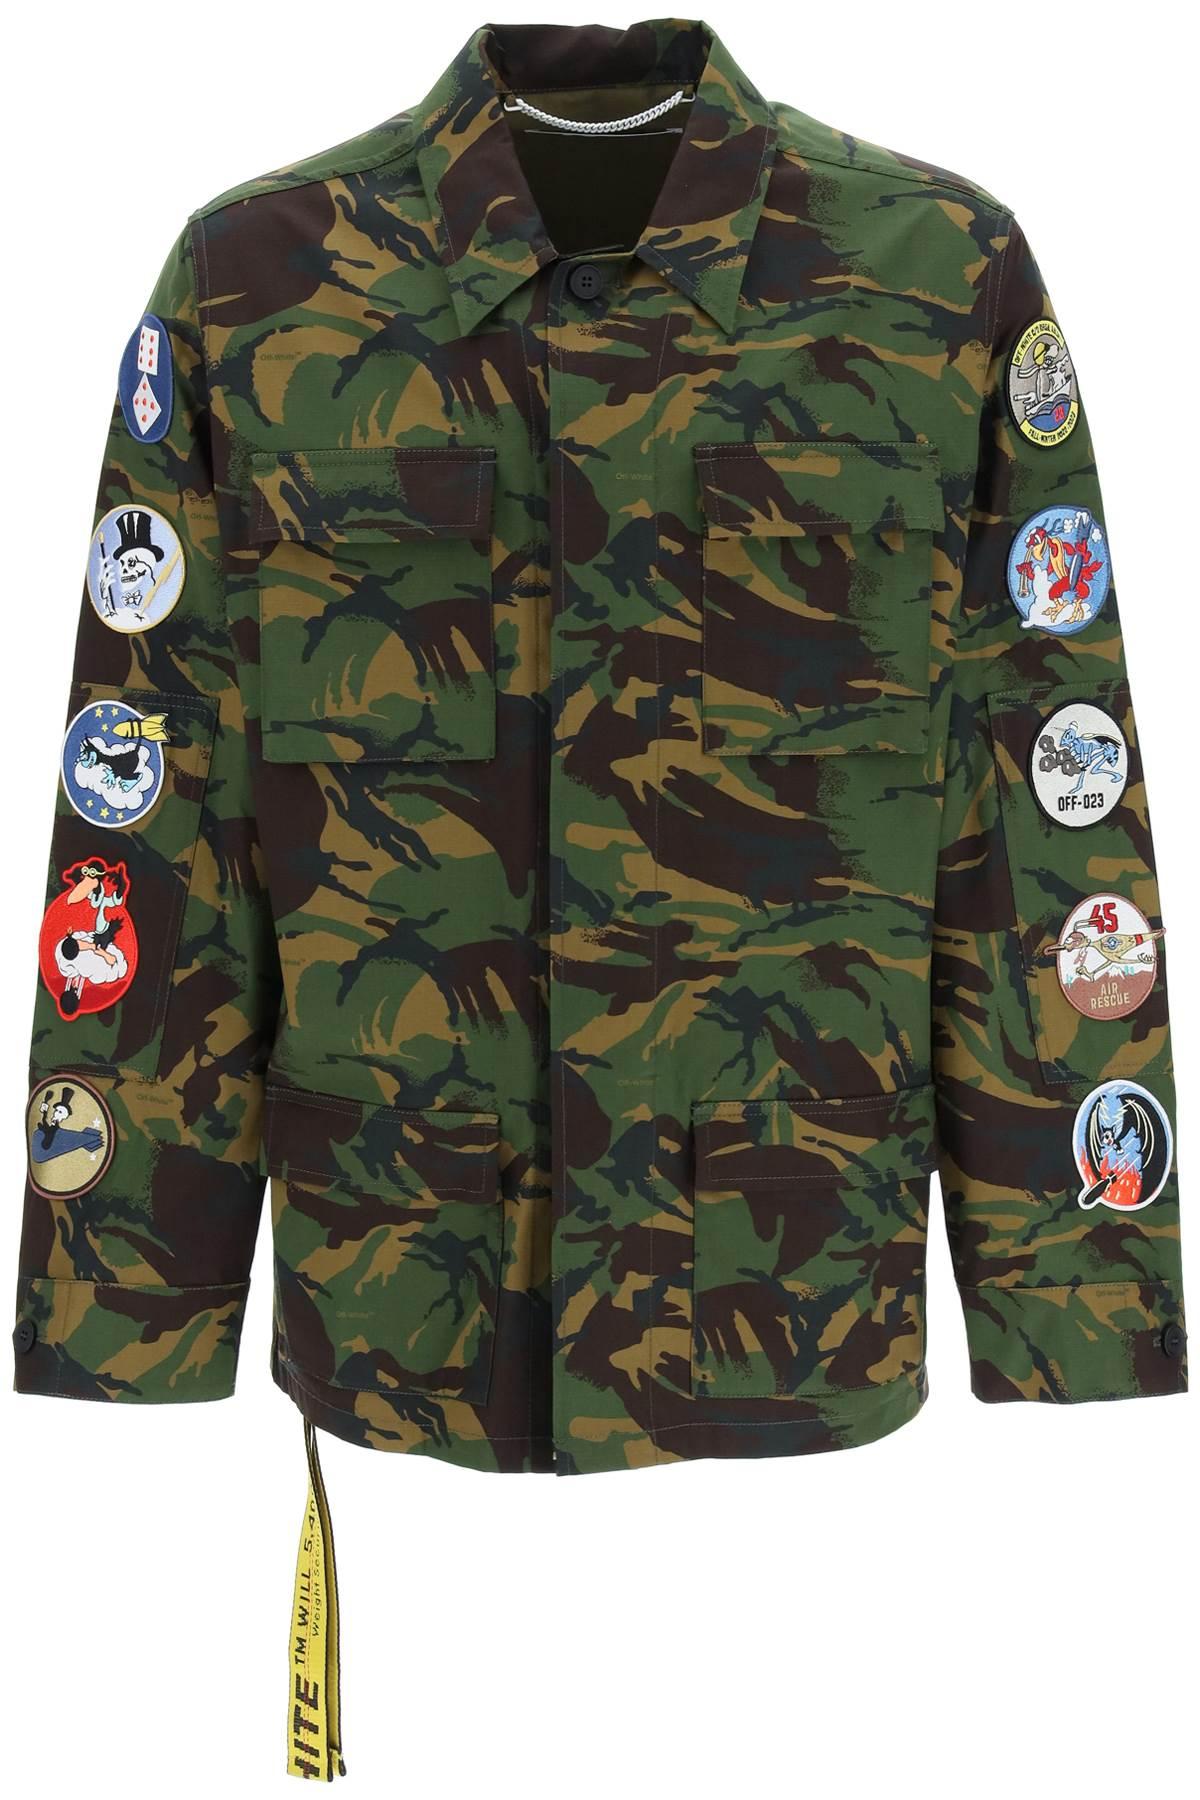 OFF-WHITE SAFARI JACKET WITH DECORATIVE PATCHES